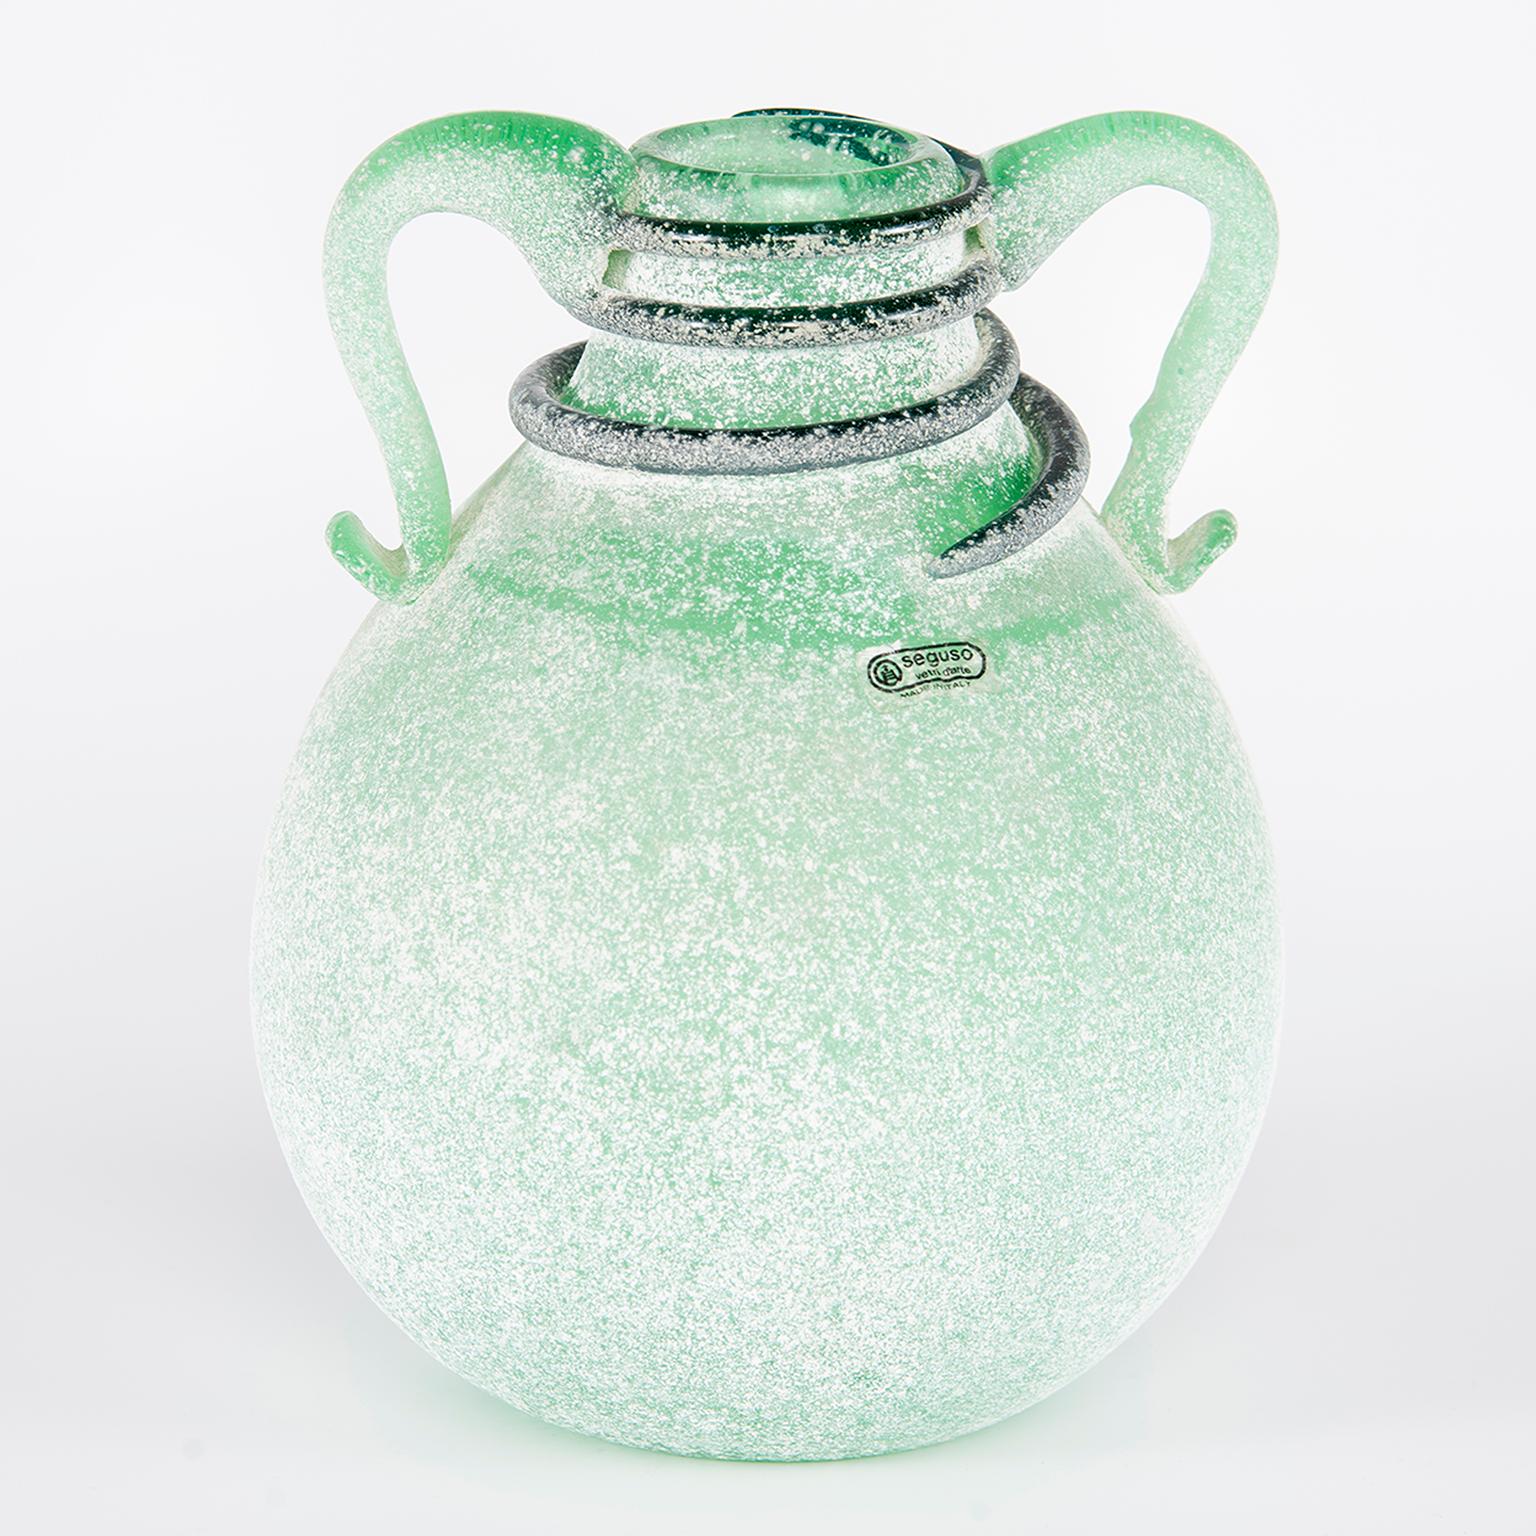 Scavo style Murano glass vase by Seguso Vetri d’Arte in bottle green color with applied handles and coiled detail at neck. Original label is affixed. Excellent vintage condition with no flaws found, circa 1970s.